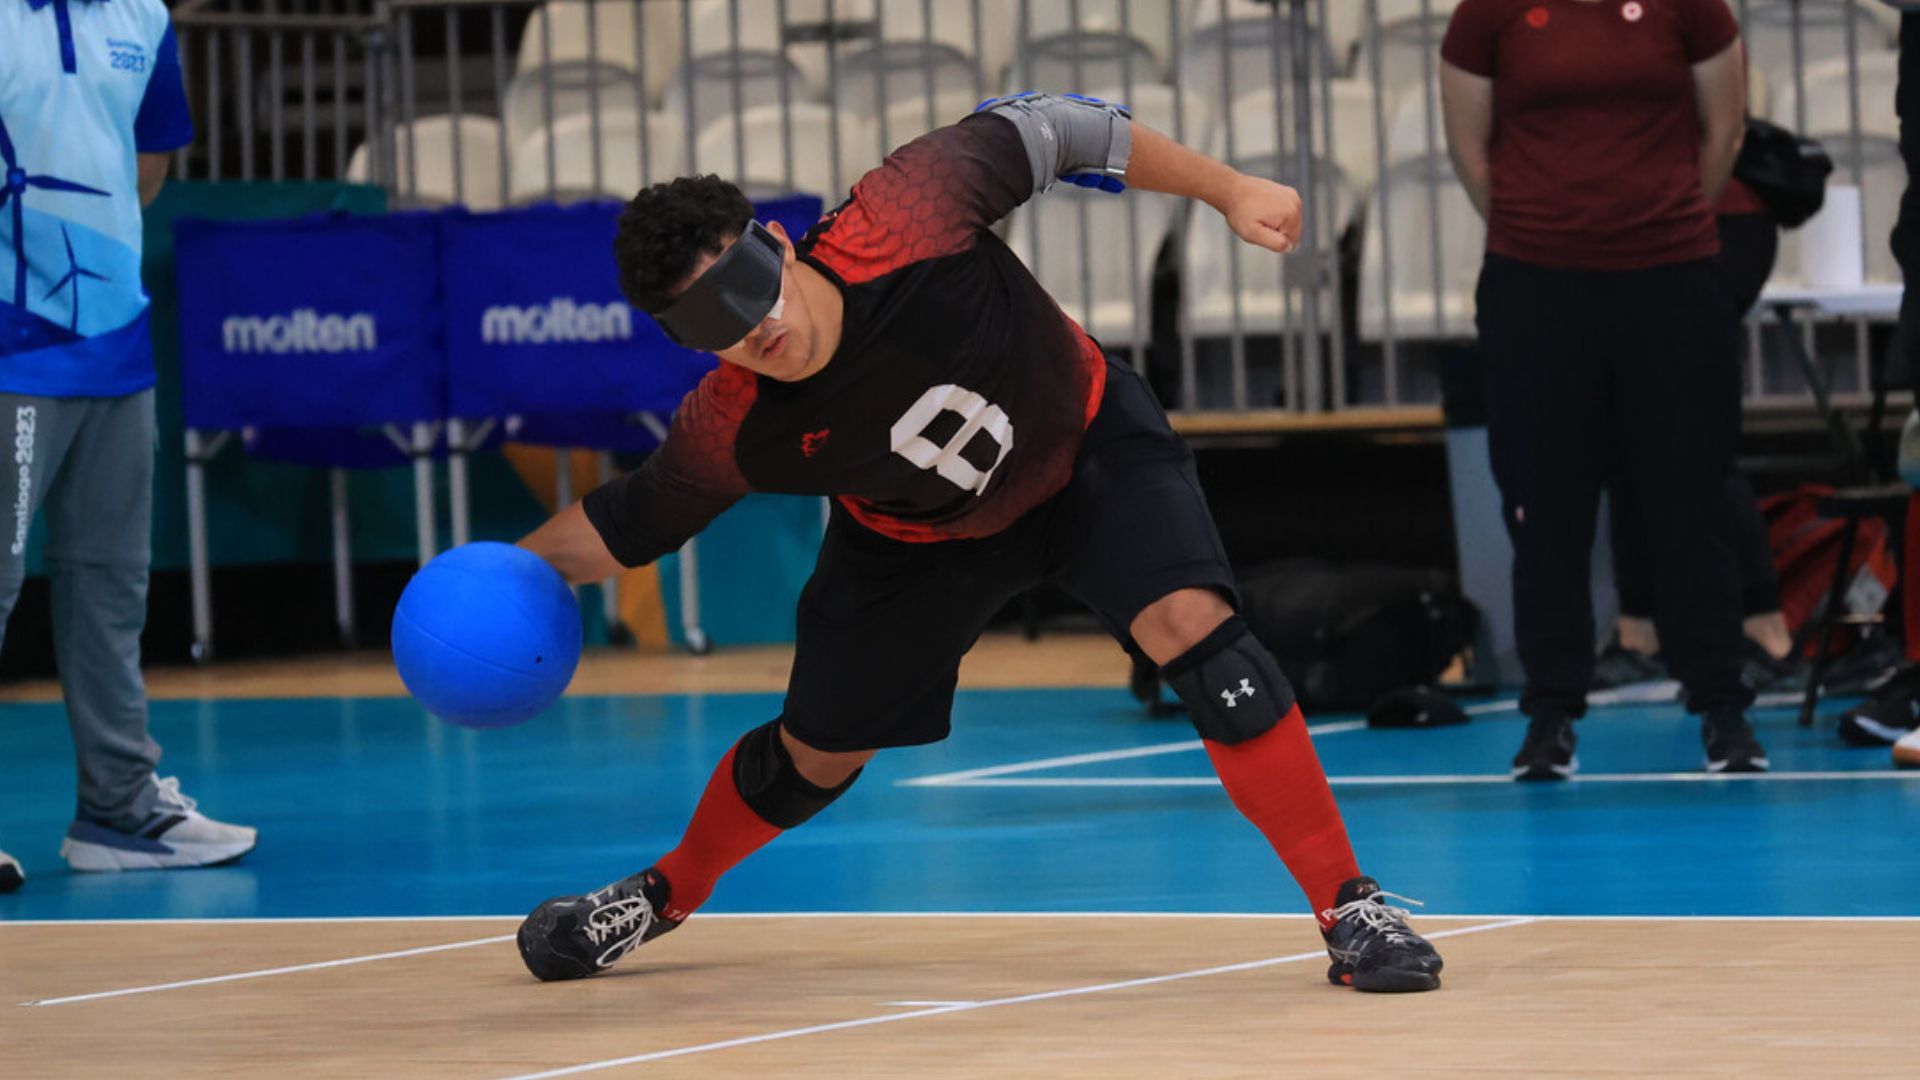 Canada Secures the Bronze in Male's Goalball